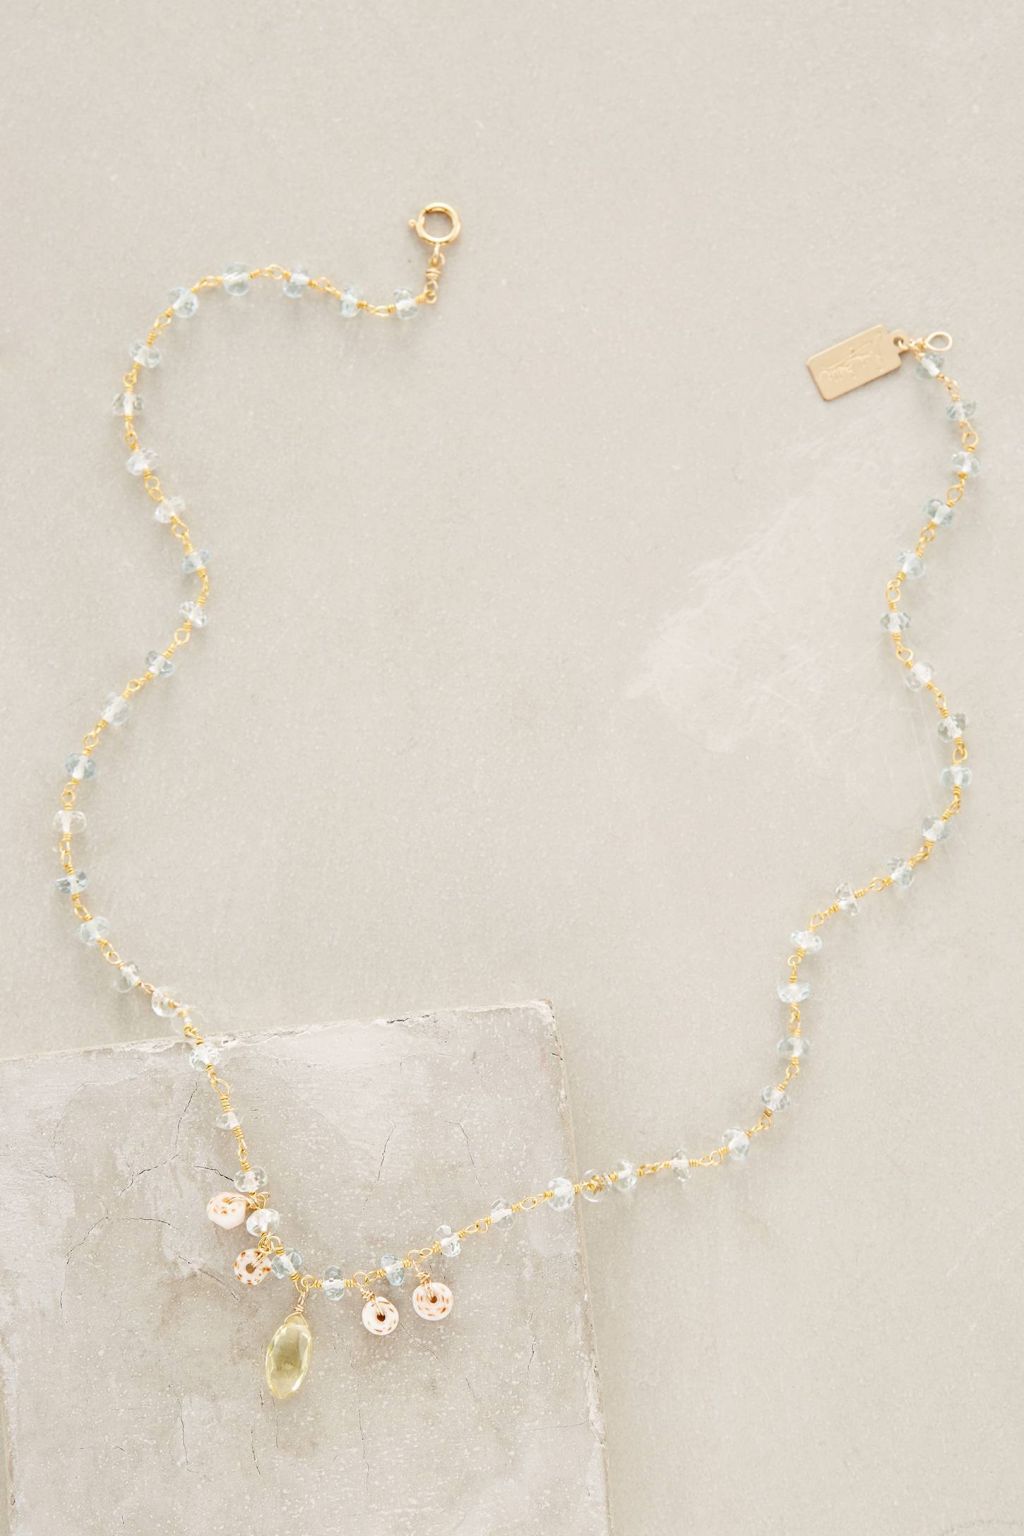 Puka Shell Necklace by RueBelle